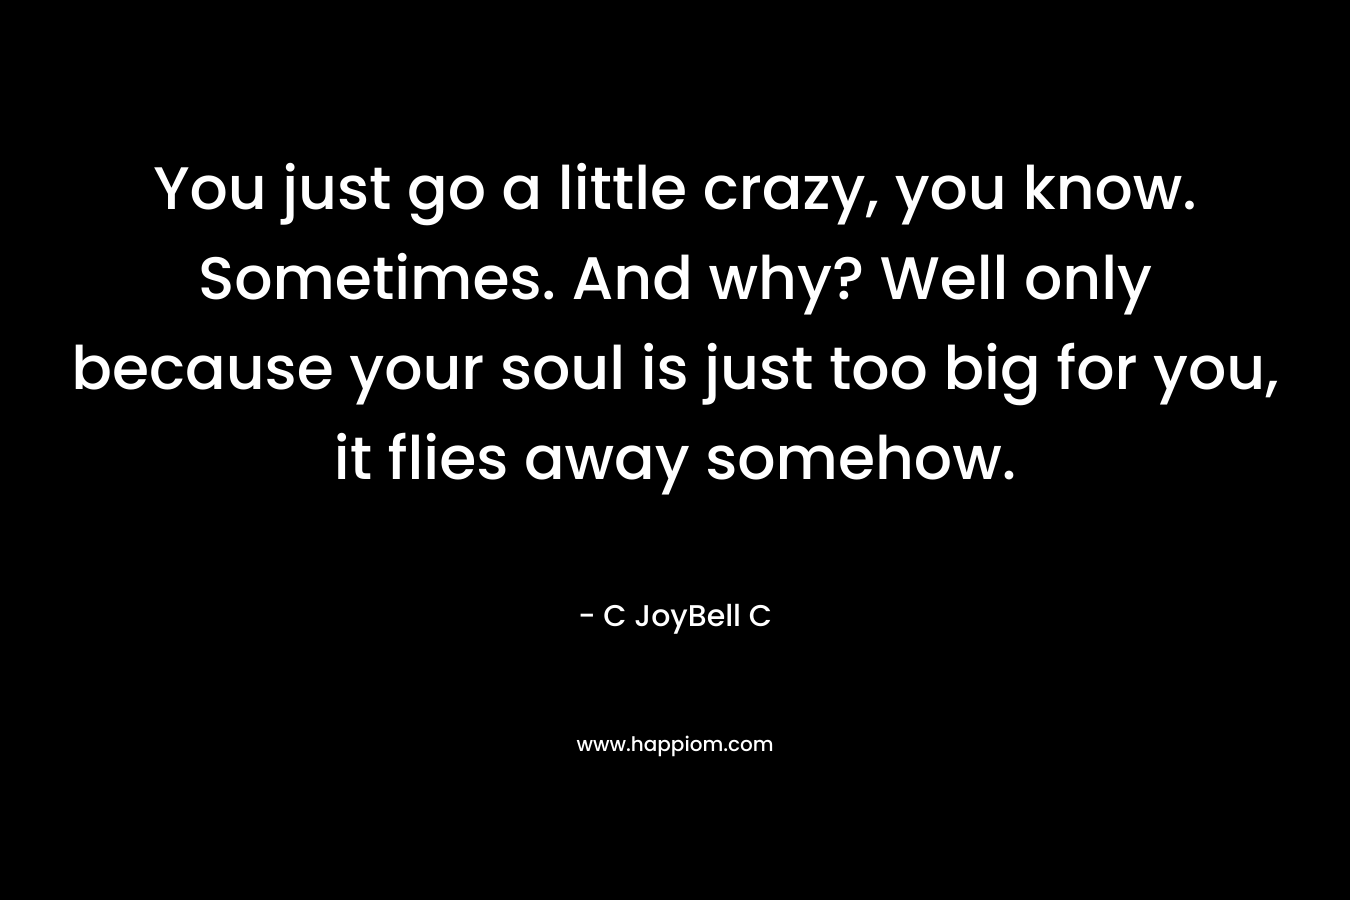 You just go a little crazy, you know. Sometimes. And why? Well only because your soul is just too big for you, it flies away somehow. – C JoyBell C